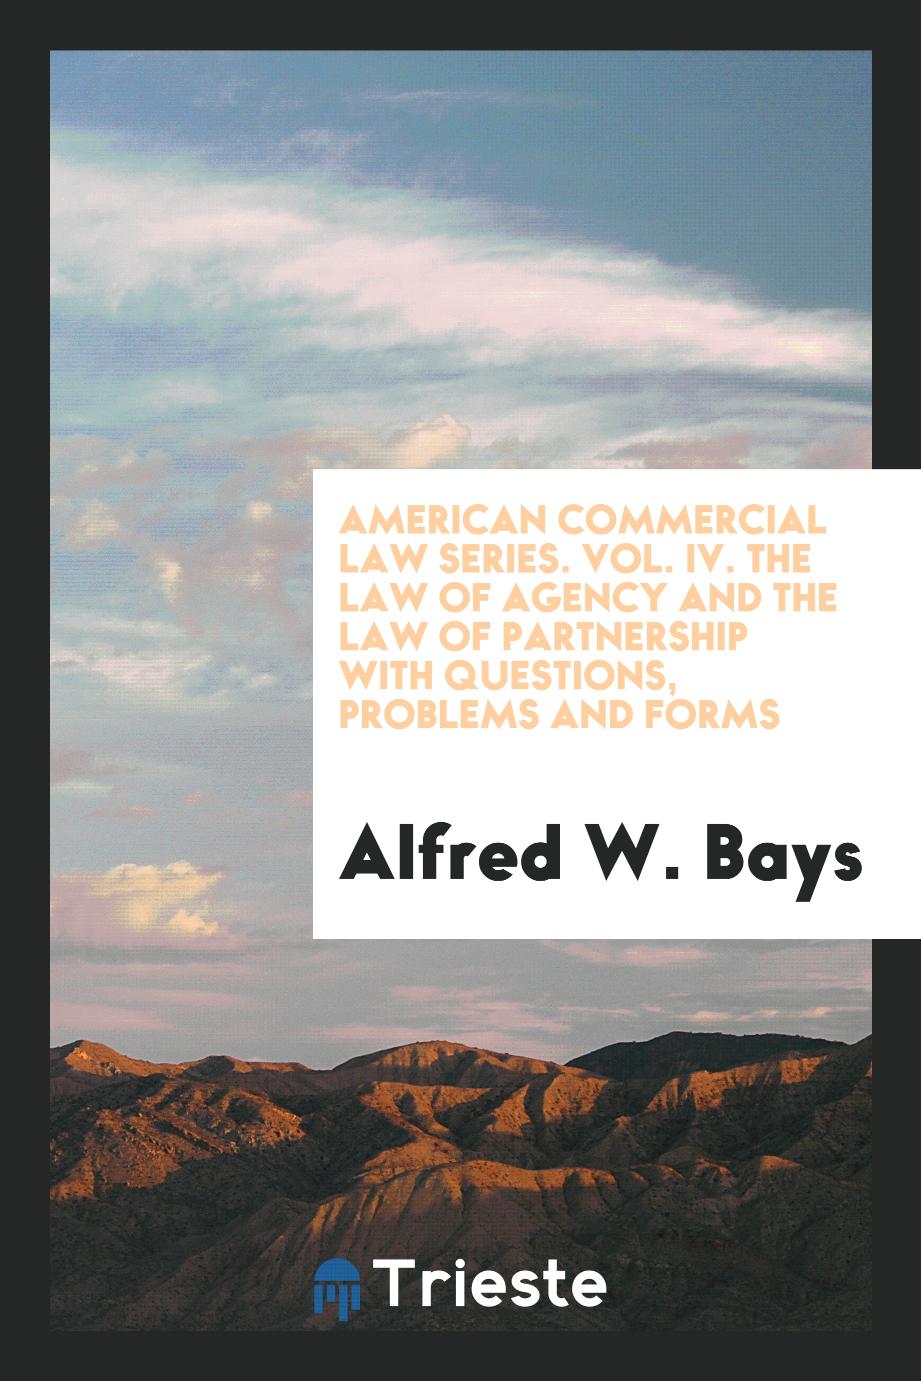 American commercial law series. Vol. IV. The law of agency and the law of partnership with questions, problems and forms